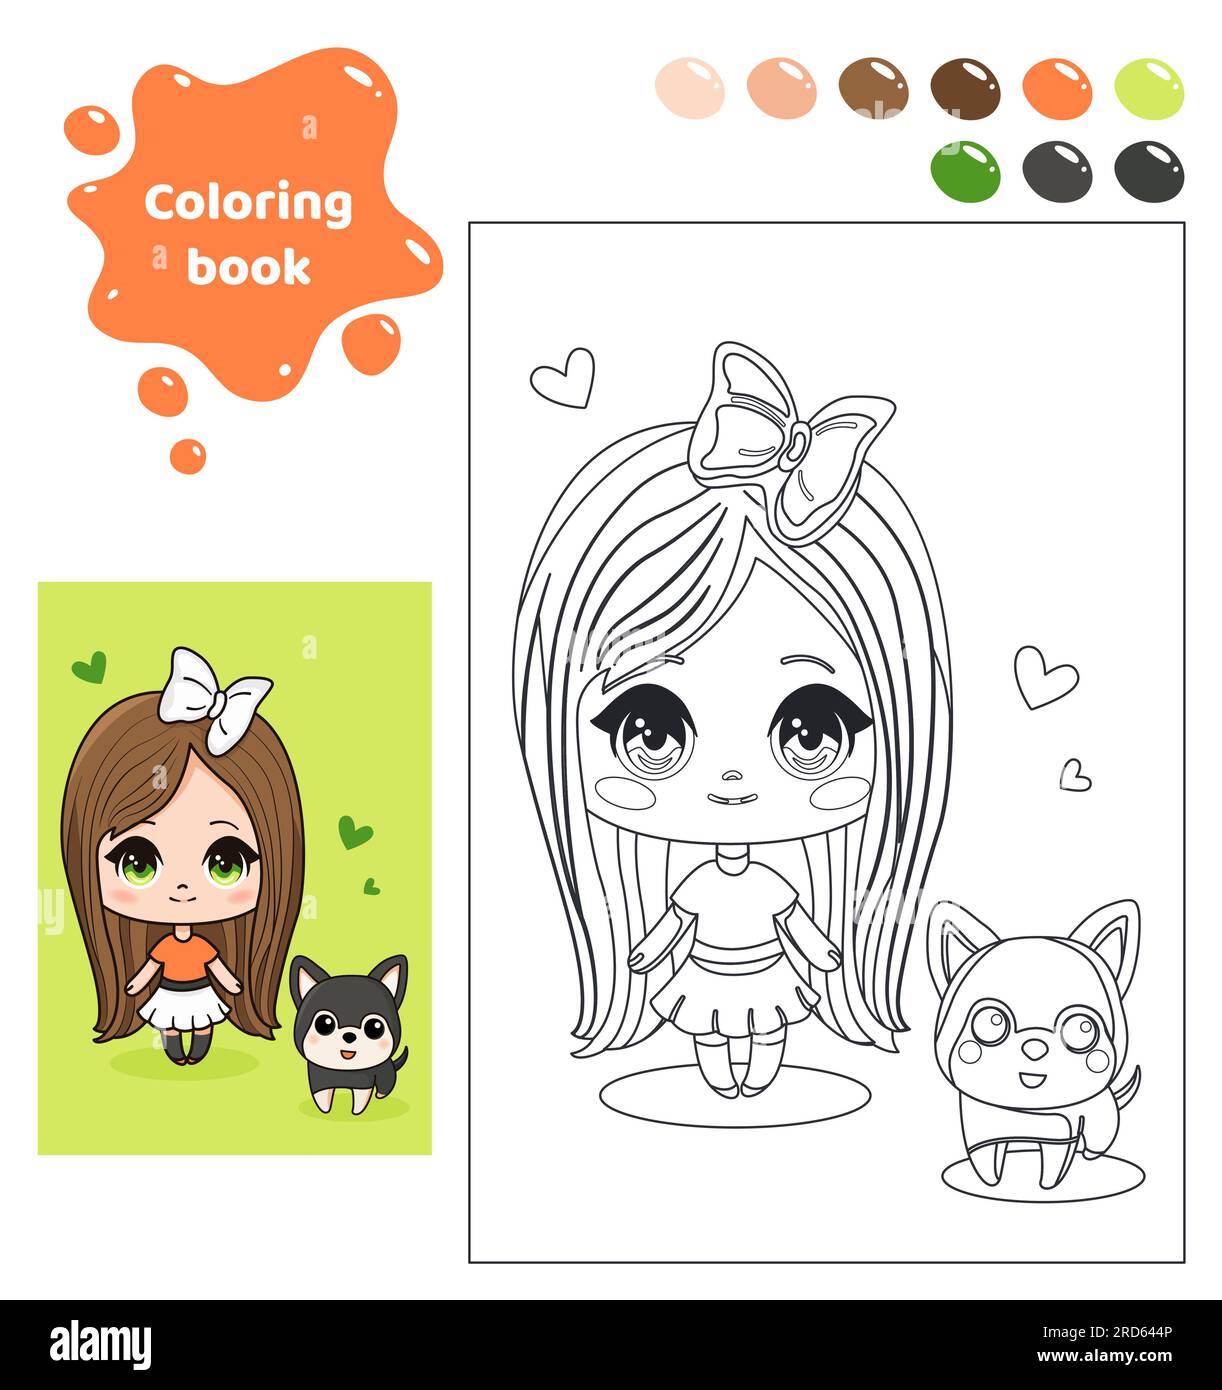 Coloring book for kids. Anime girl with puppy. Stock Vector